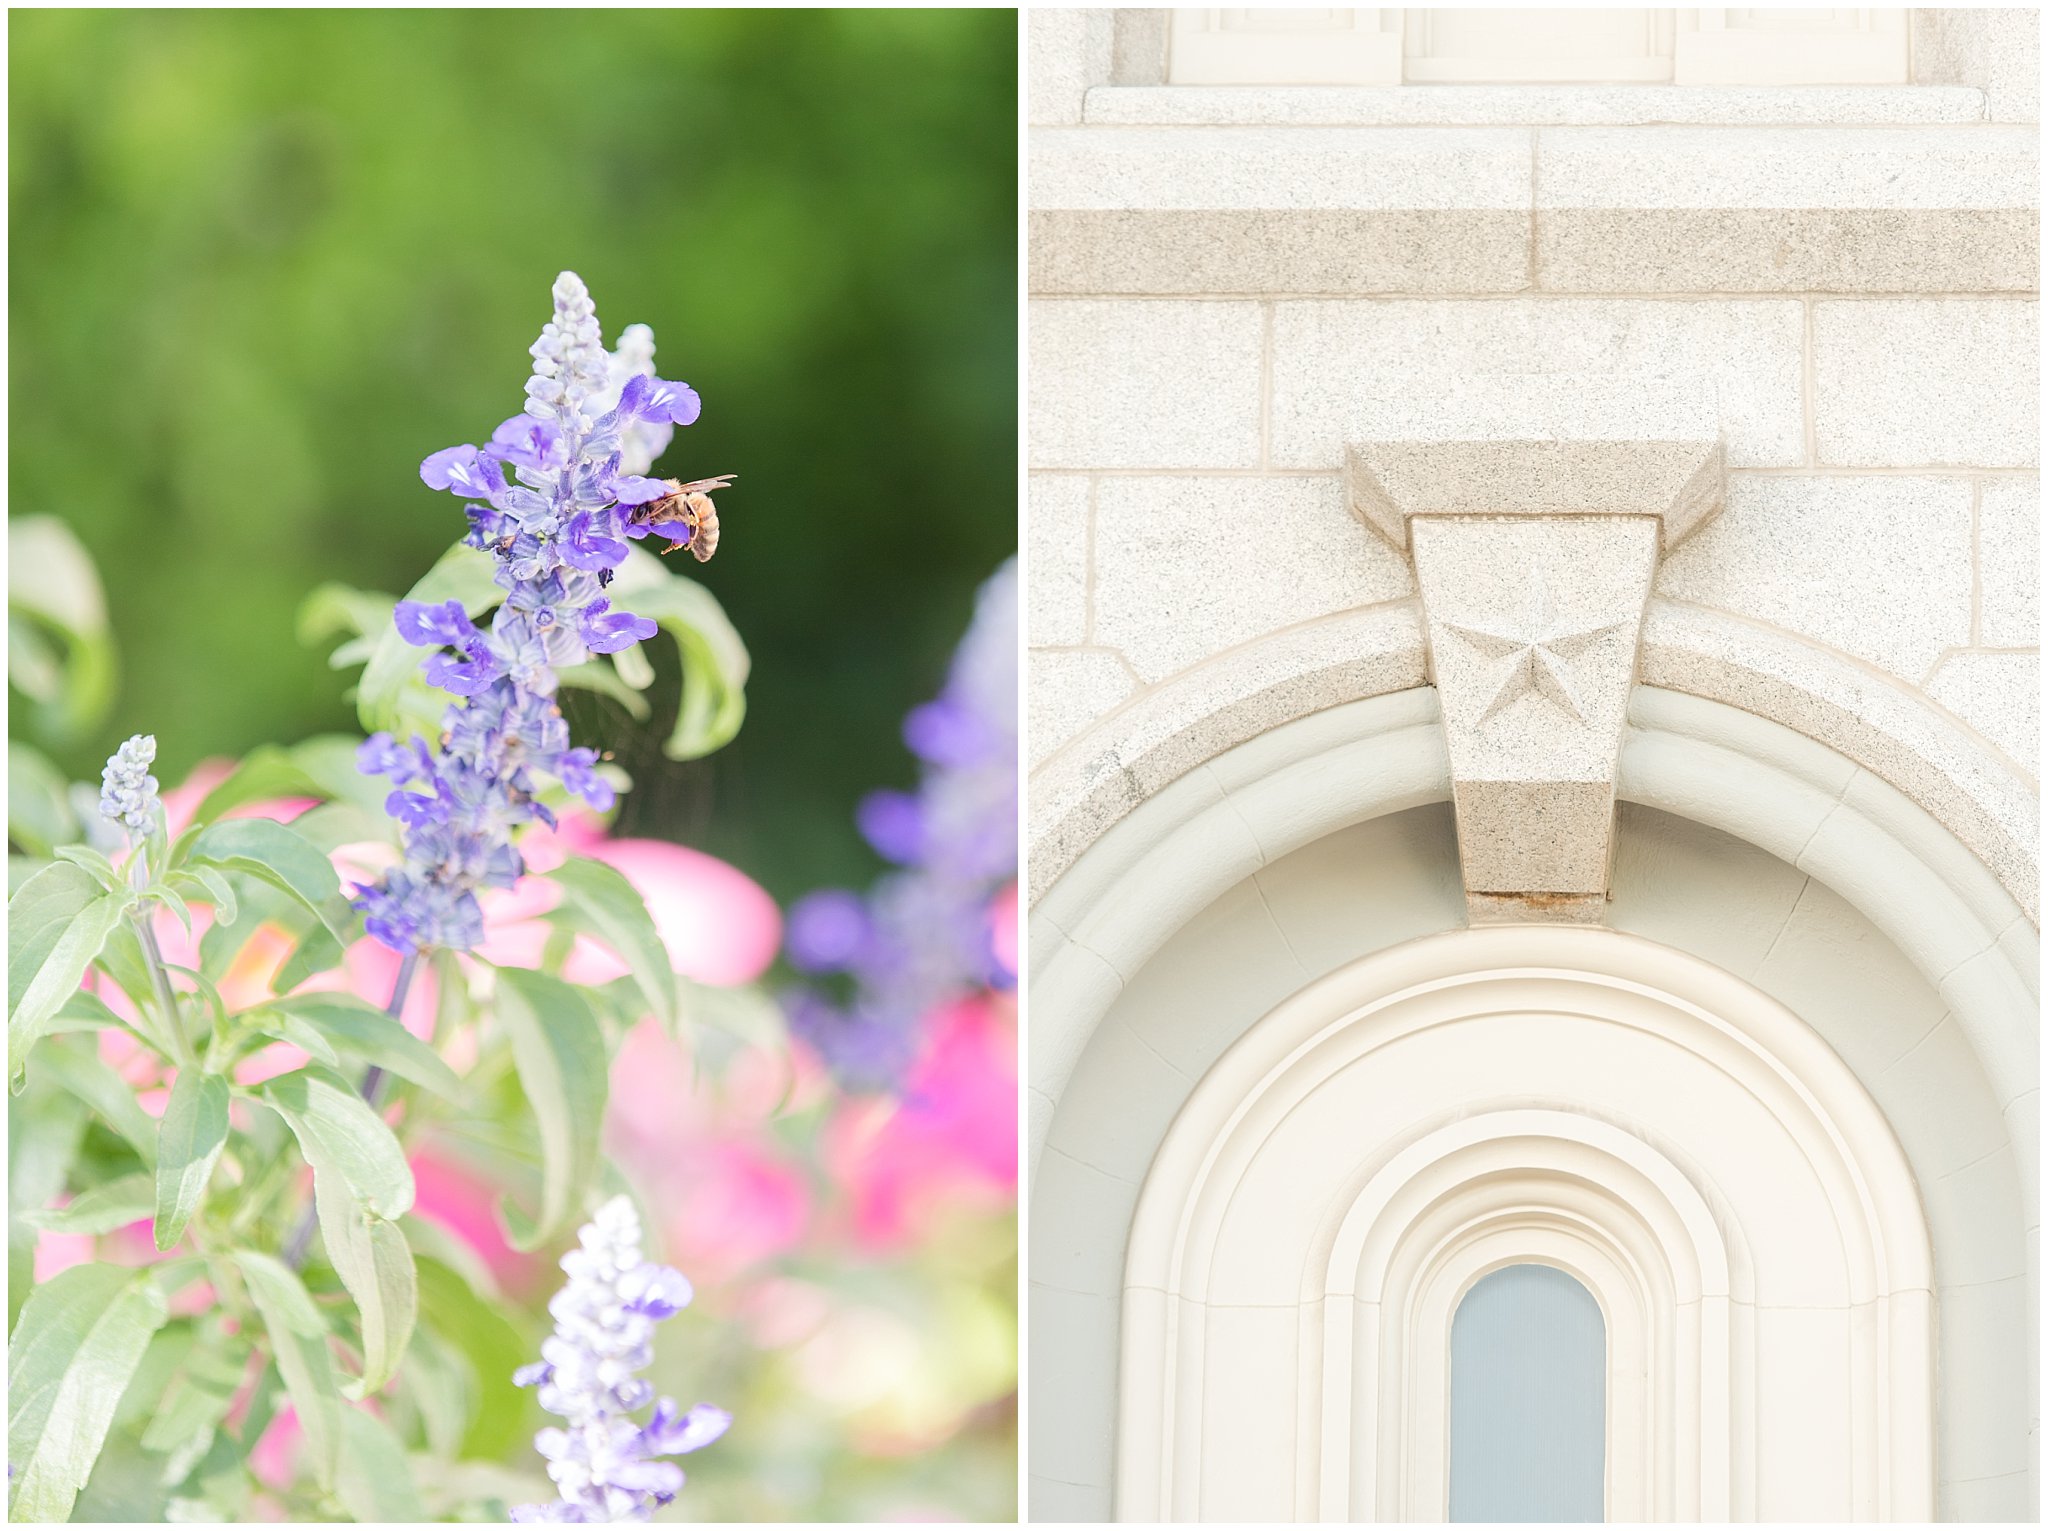 Bee on a flower and temple details | Salt Lake Temple Wedding and Clearfield City Hall Reception | Utah Wedding Photographers | Jessie and Dallin Photography